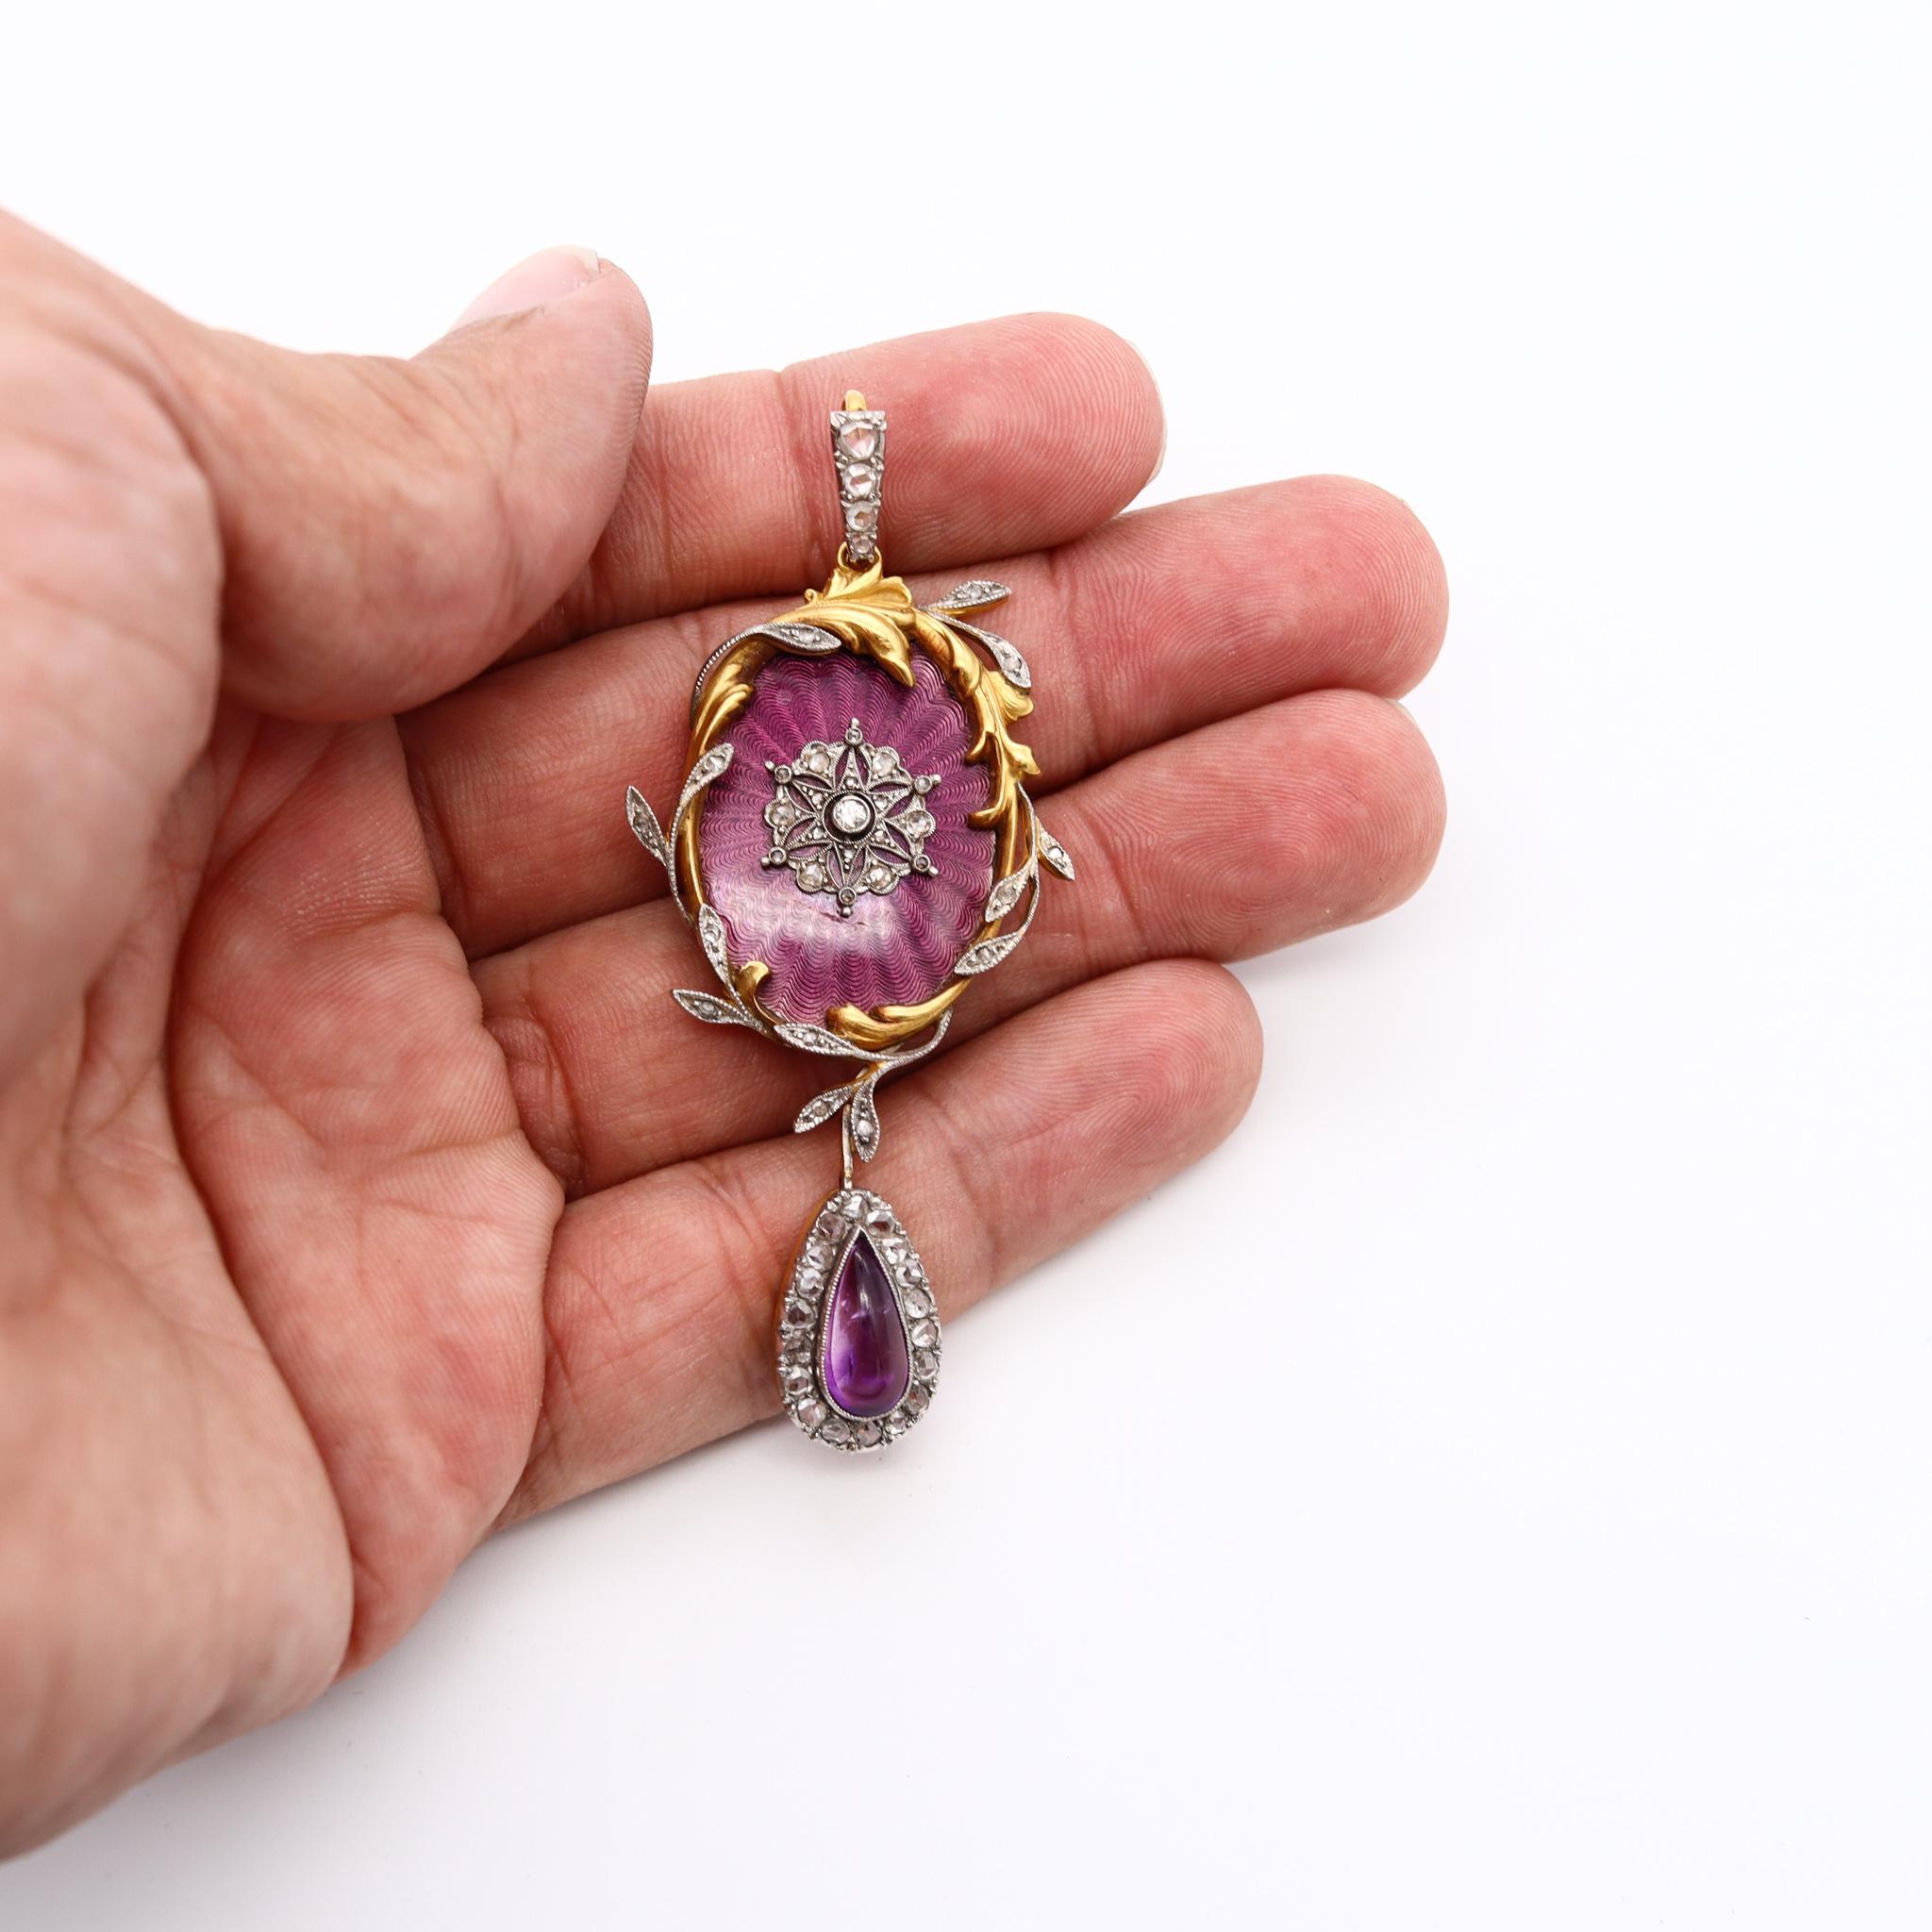 French 1790 Georgian Guilloche Enameled Pendant 18Kt Gold 4.26 Diamonds Amethyst In Excellent Condition For Sale In Miami, FL